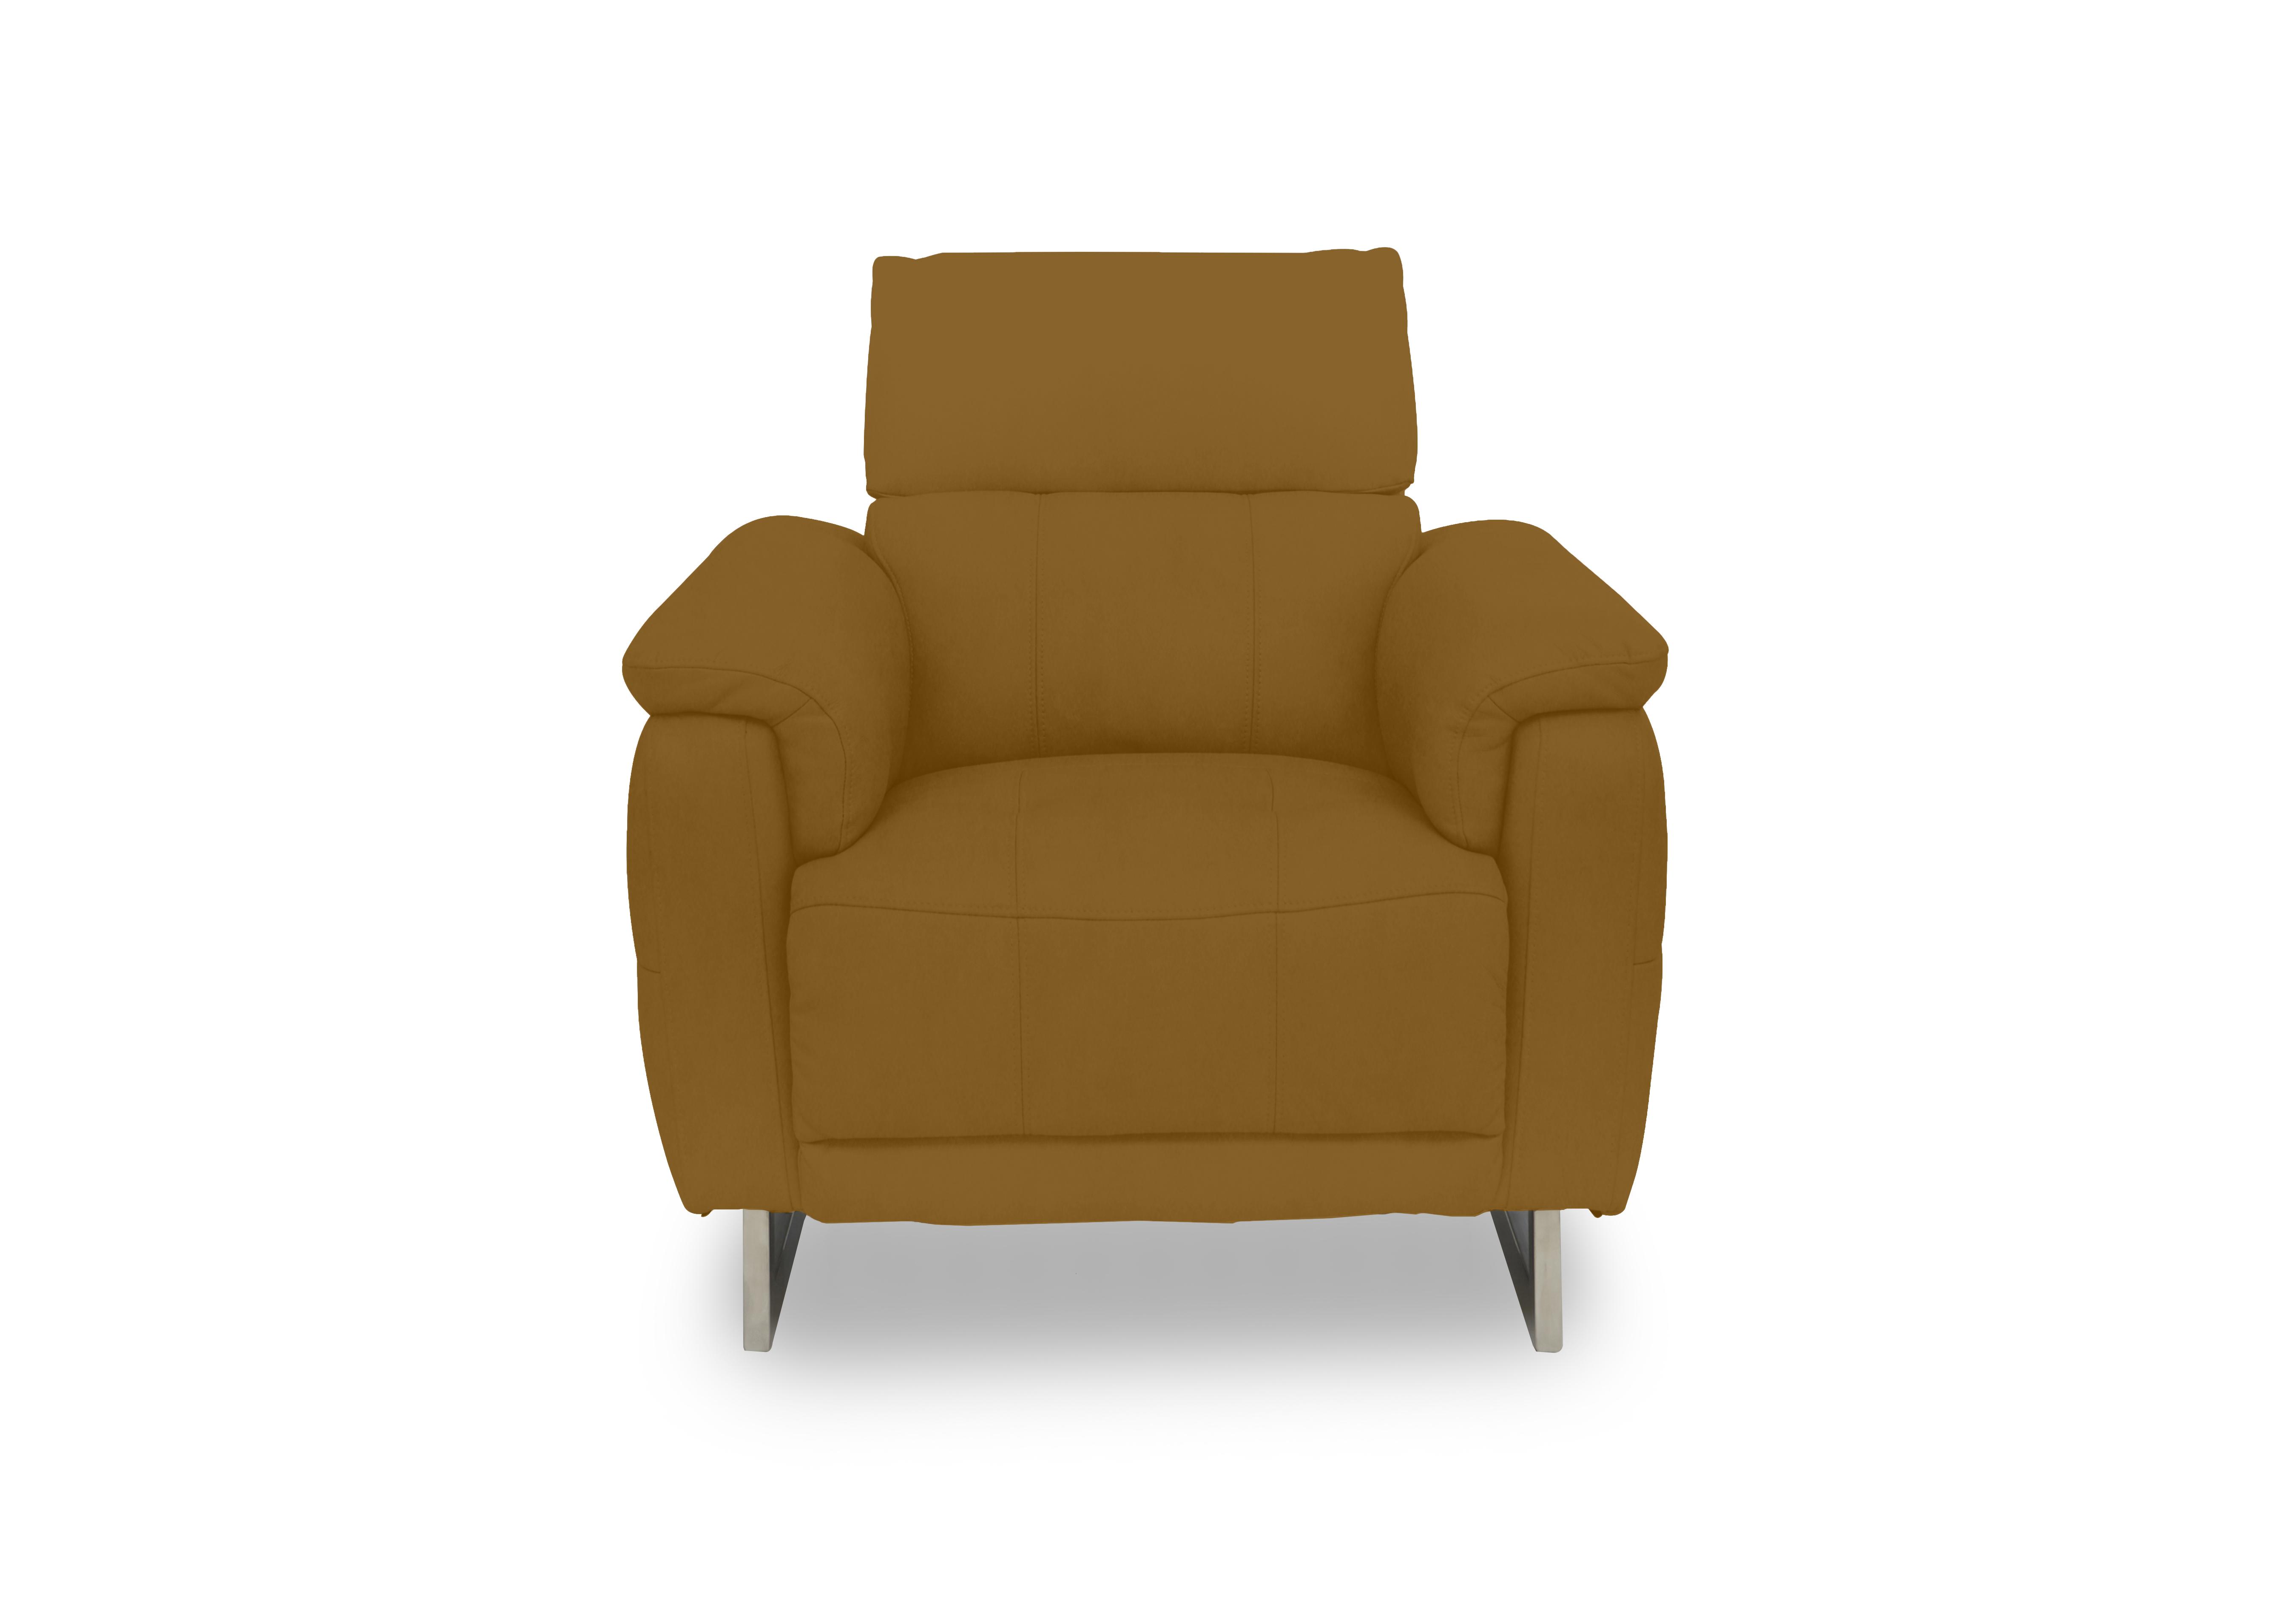 Moet Fabric Power Recliner Chair with Telescopic Headrest in 51009 Opulence Saffron on Furniture Village